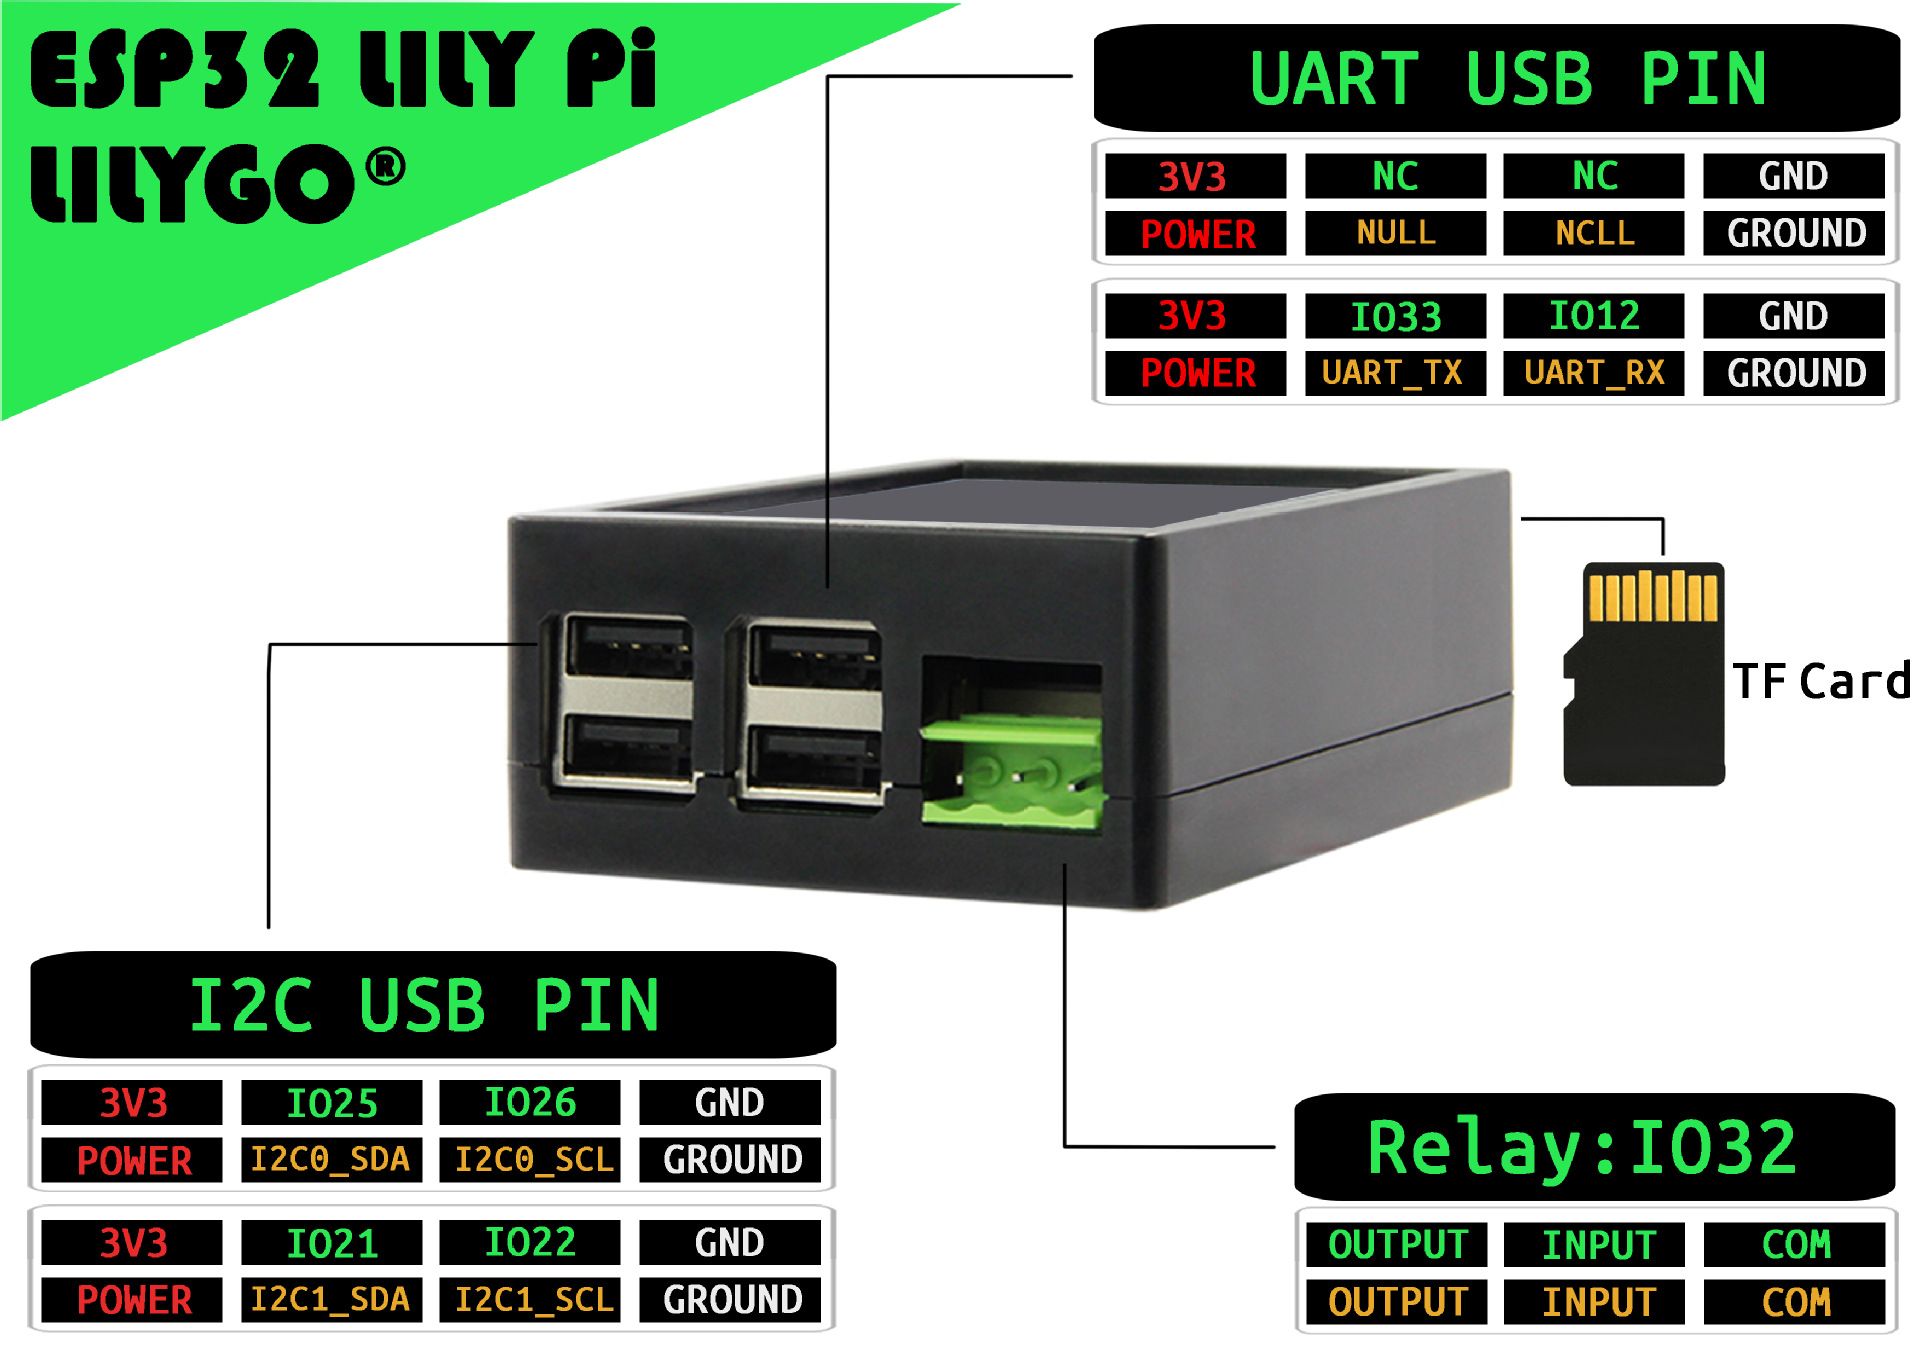 LILYGOreg-LILY-Pi-ESP32-WiFi-bluetooth-35-Inch-Capacitive-Touch-Screen-with-5V-2A-Relay-USB-Expansio-1741427